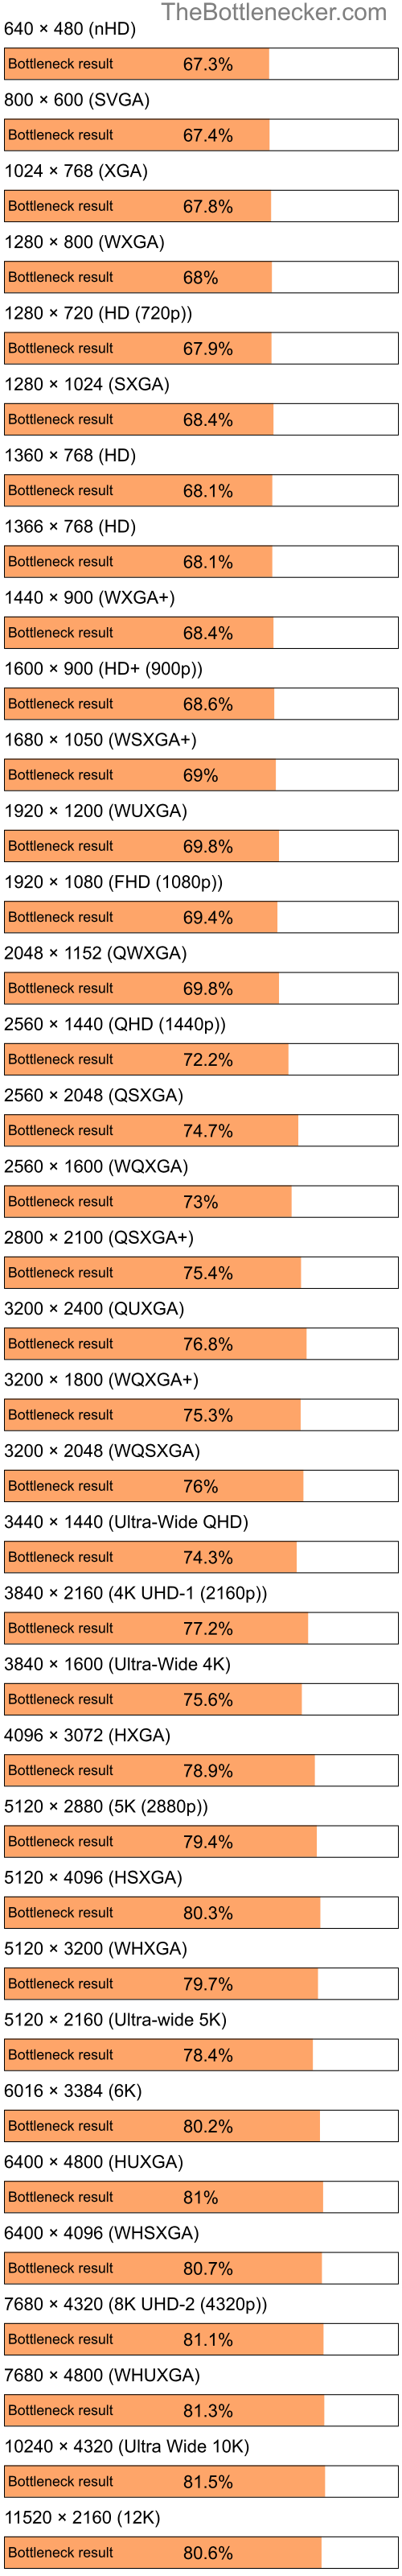 Bottleneck results by resolution for Intel Pentium 4 and AMD Radeon X800 XL in General Tasks